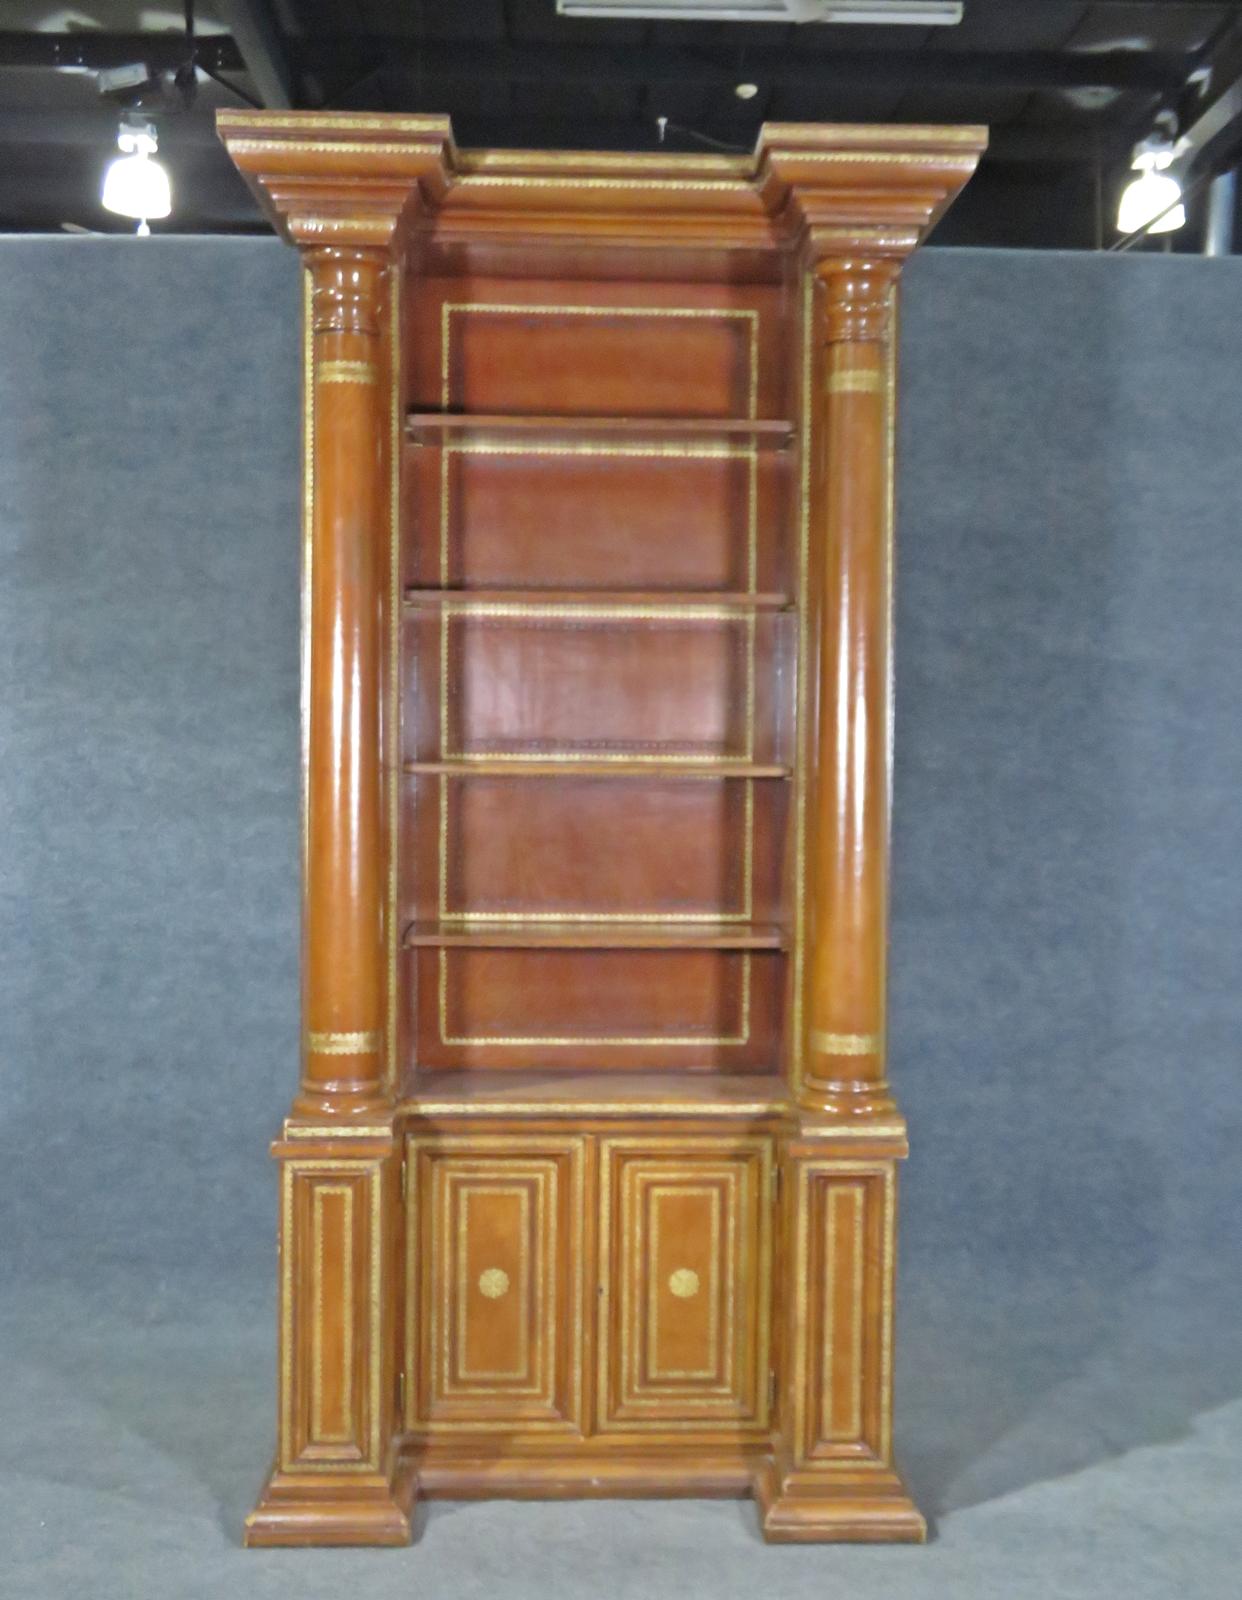 This is a fantastic and very tall leather-wrapped gold-tooled embossed bookcase with 4 shelves and it is in two pieces. The cabinet is a masterpiece and has a very stately appearance. There are 4 shelves. Measures: 96 1/2